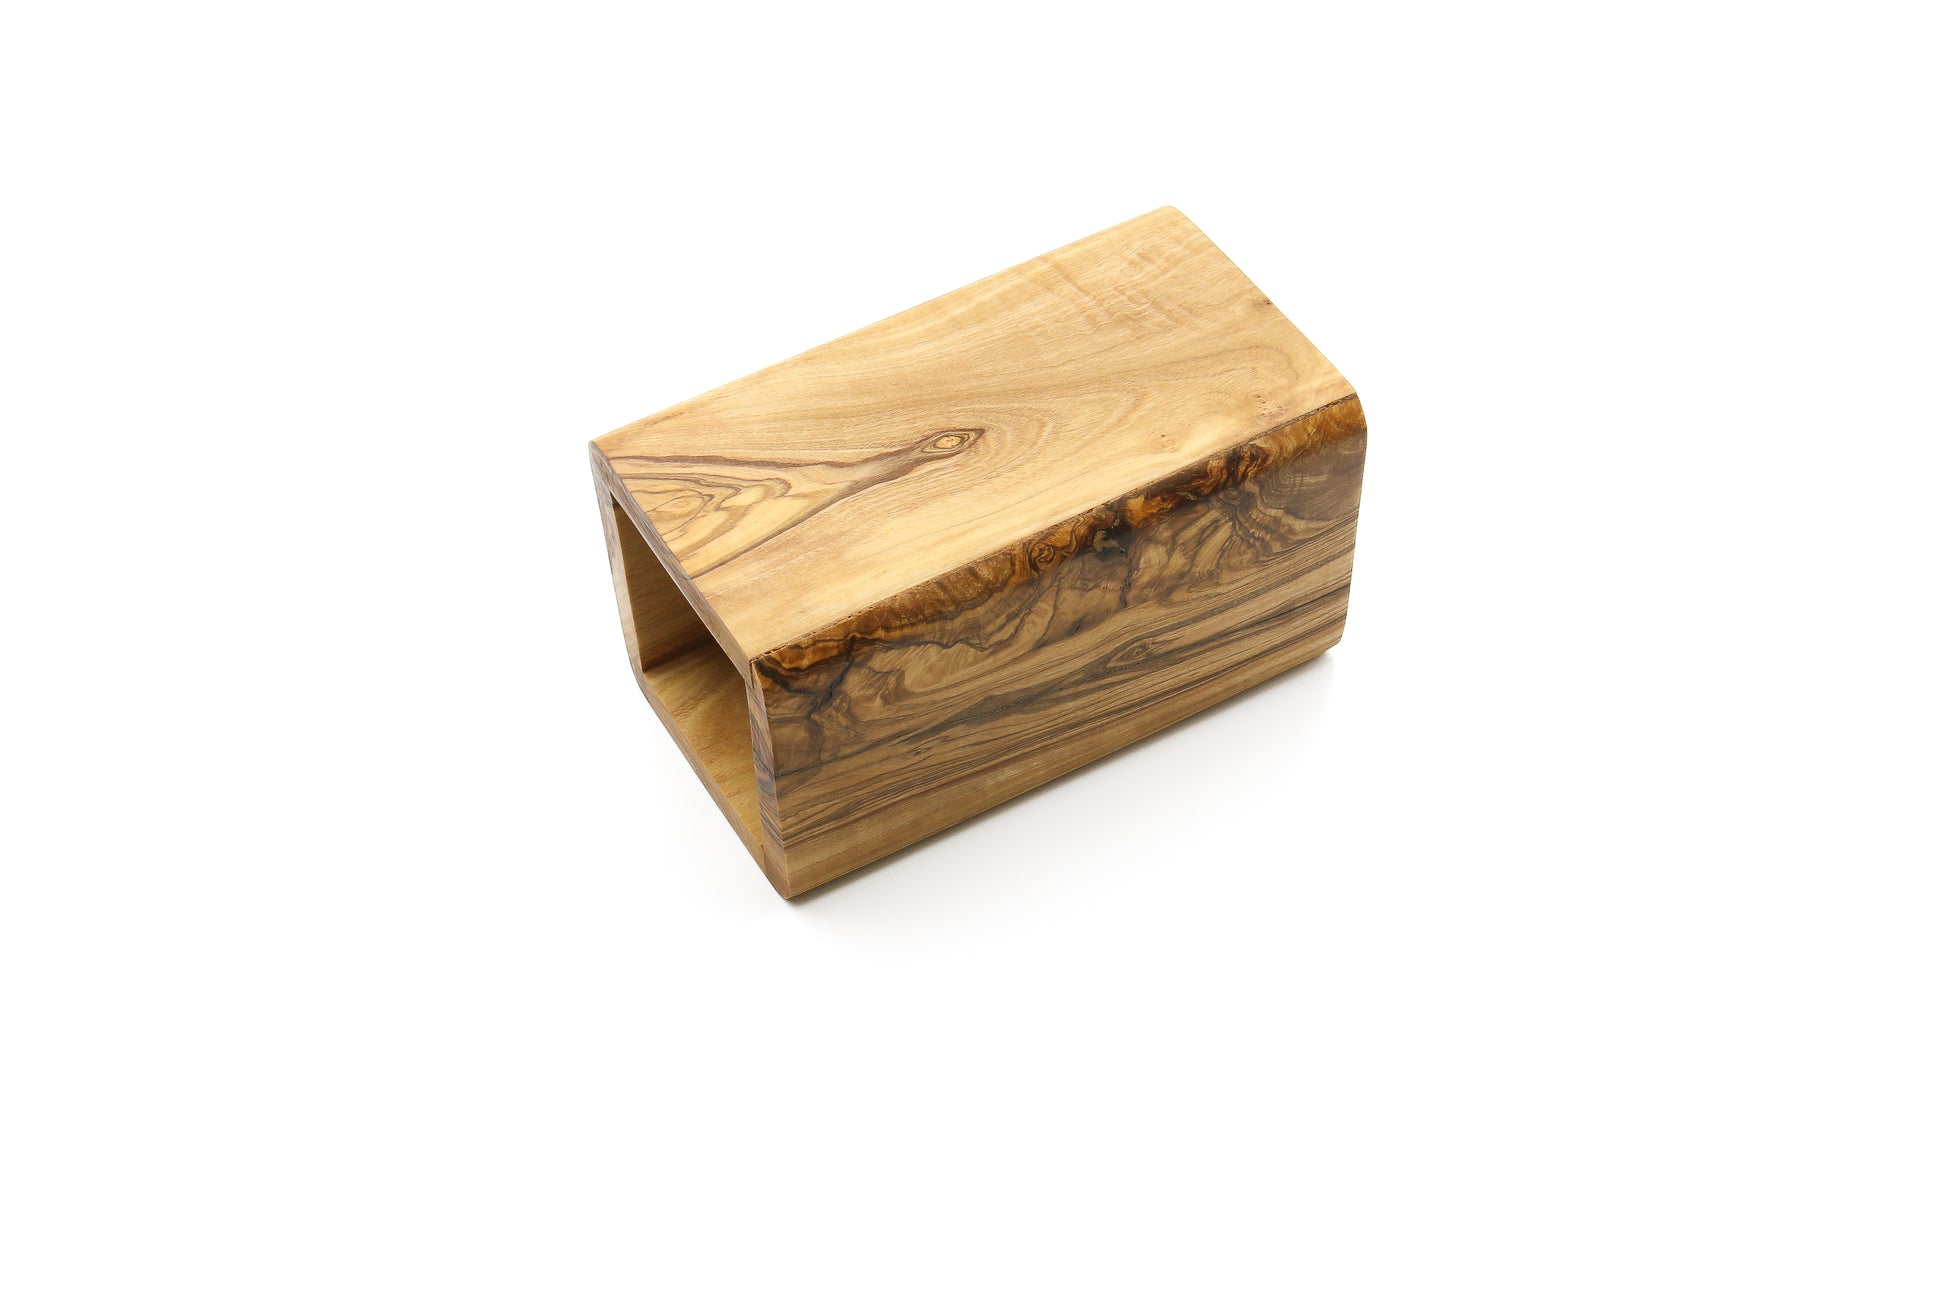 Olive wood countertop accessory for your kitchen tools